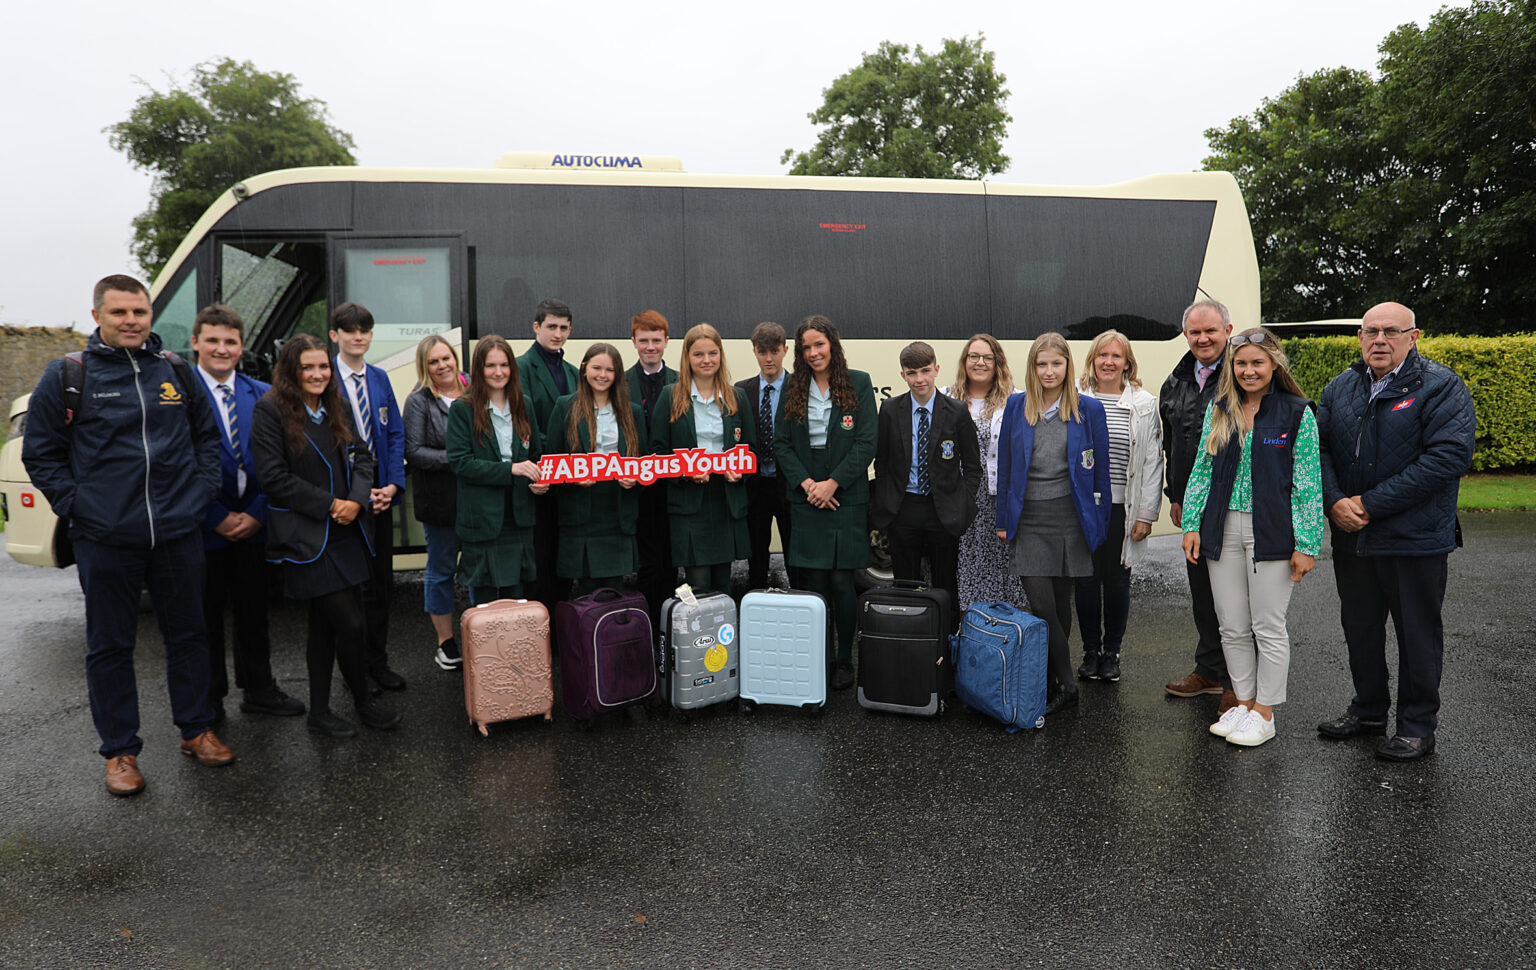 Students participating in the ABP NI Angus Youth Challenge pictured with ABP Staff members in front of a bus